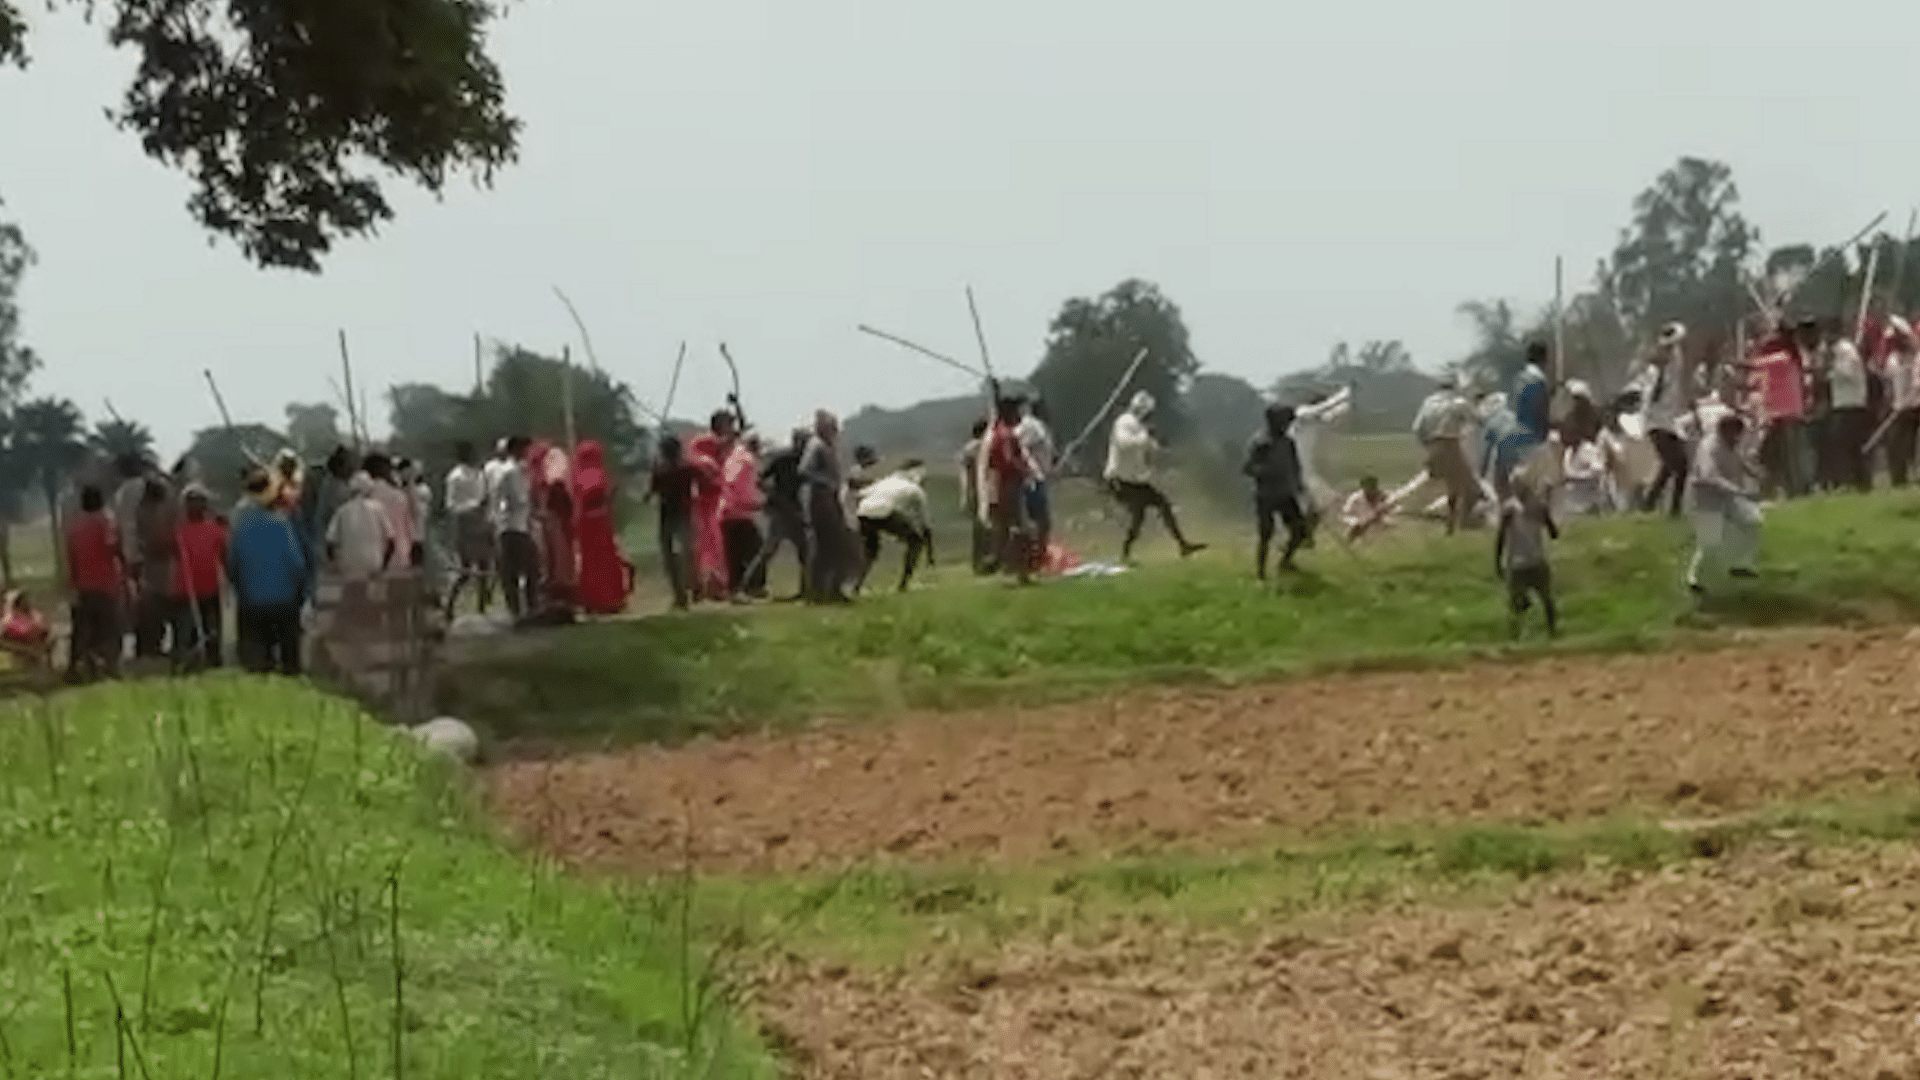 In one of the videos, a large number of people can be seen holding sticks and attacking another group of people.